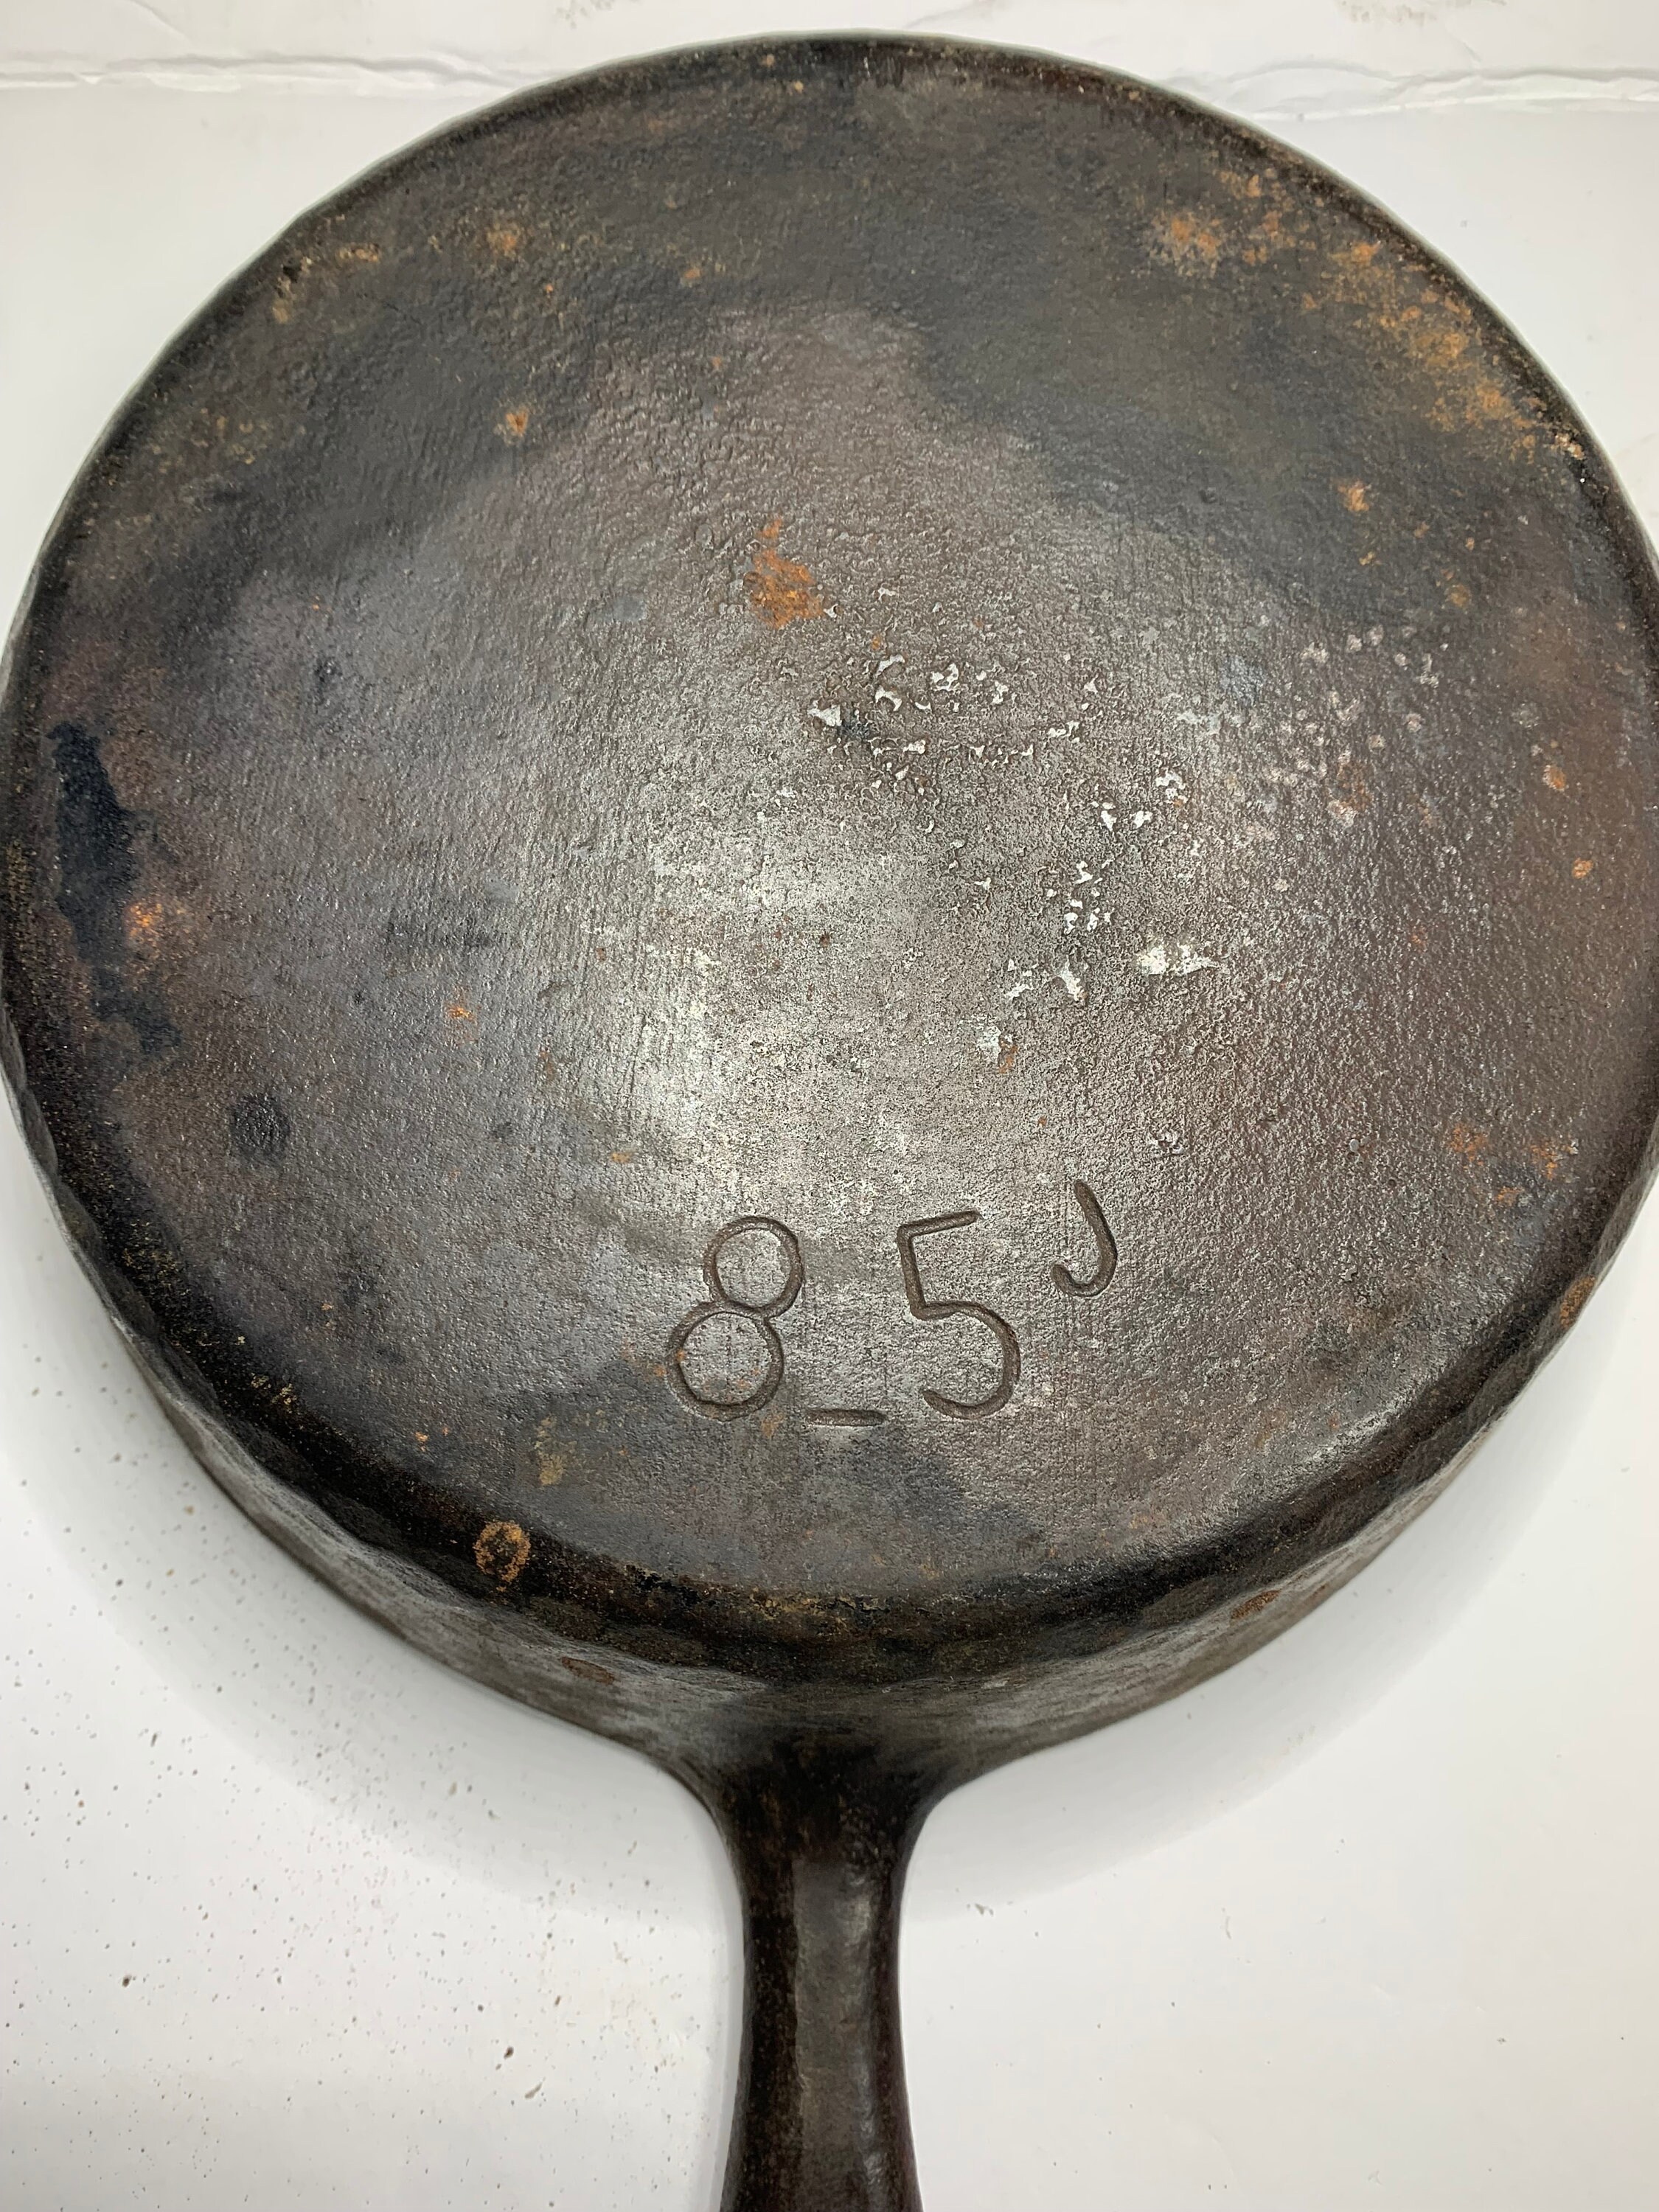 A Lodge family legacy, forged in cast iron - It's a Southern Thing